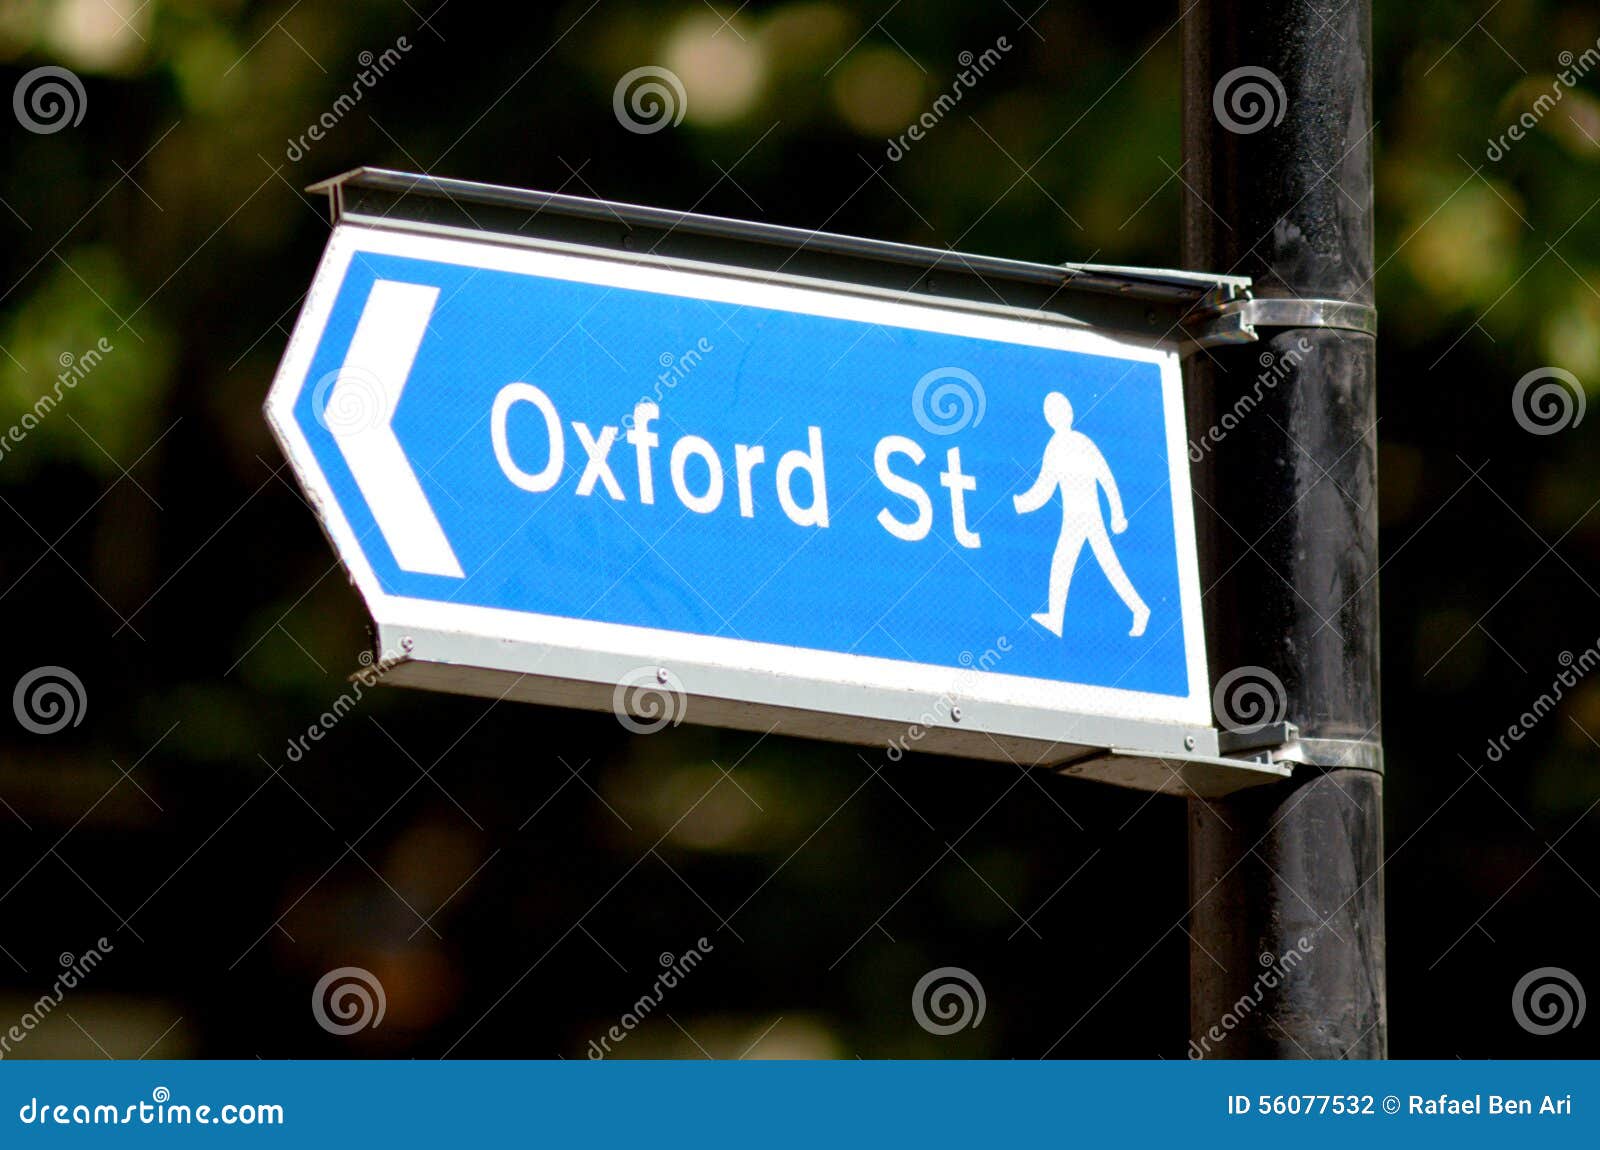 oxford street sign in london england uk